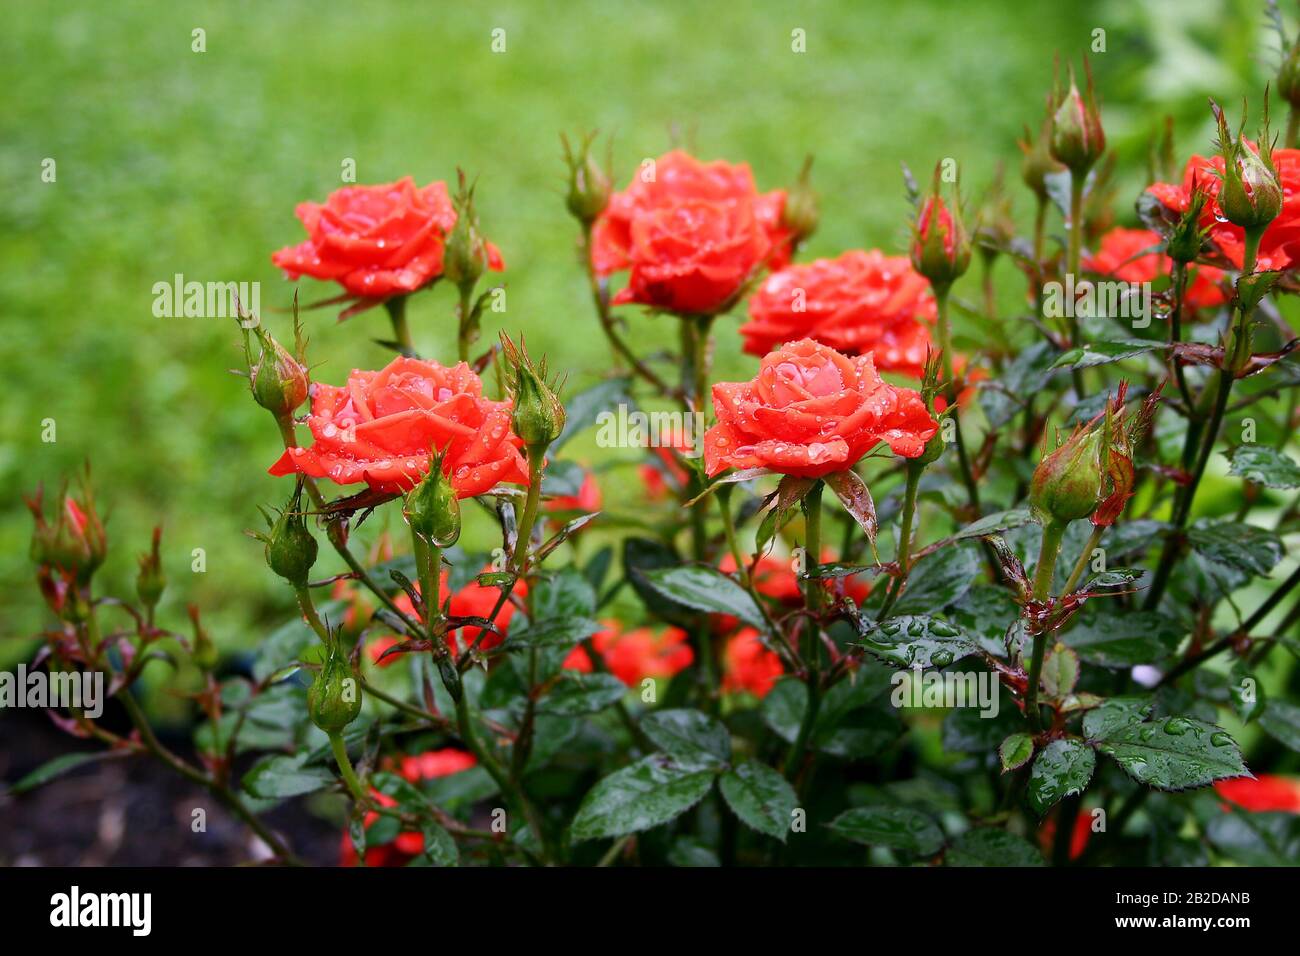 the bush of the red roses on the green lawn background after rain in the rural garden Stock Photo